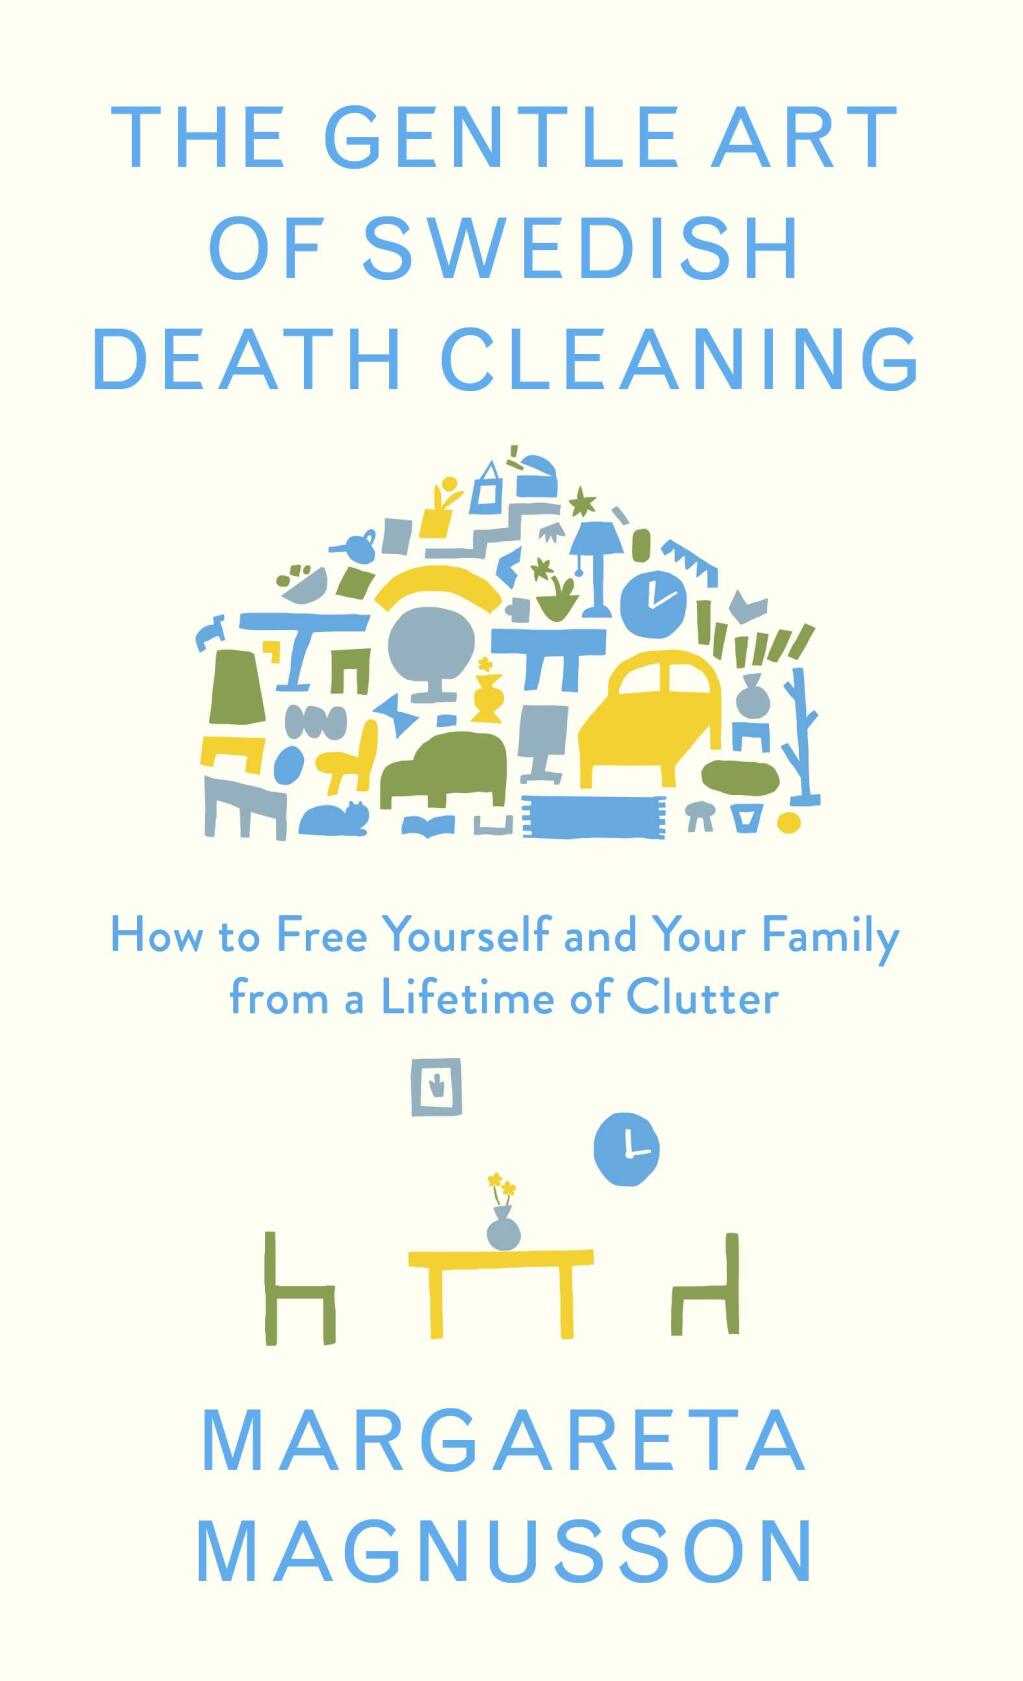 This undated photo provided by Simon and Schuster shows the cover of the book 'The Gentle Art of Swedish Death Cleaning,' by Margareta Magnusson. (Simon and Schuster via AP)